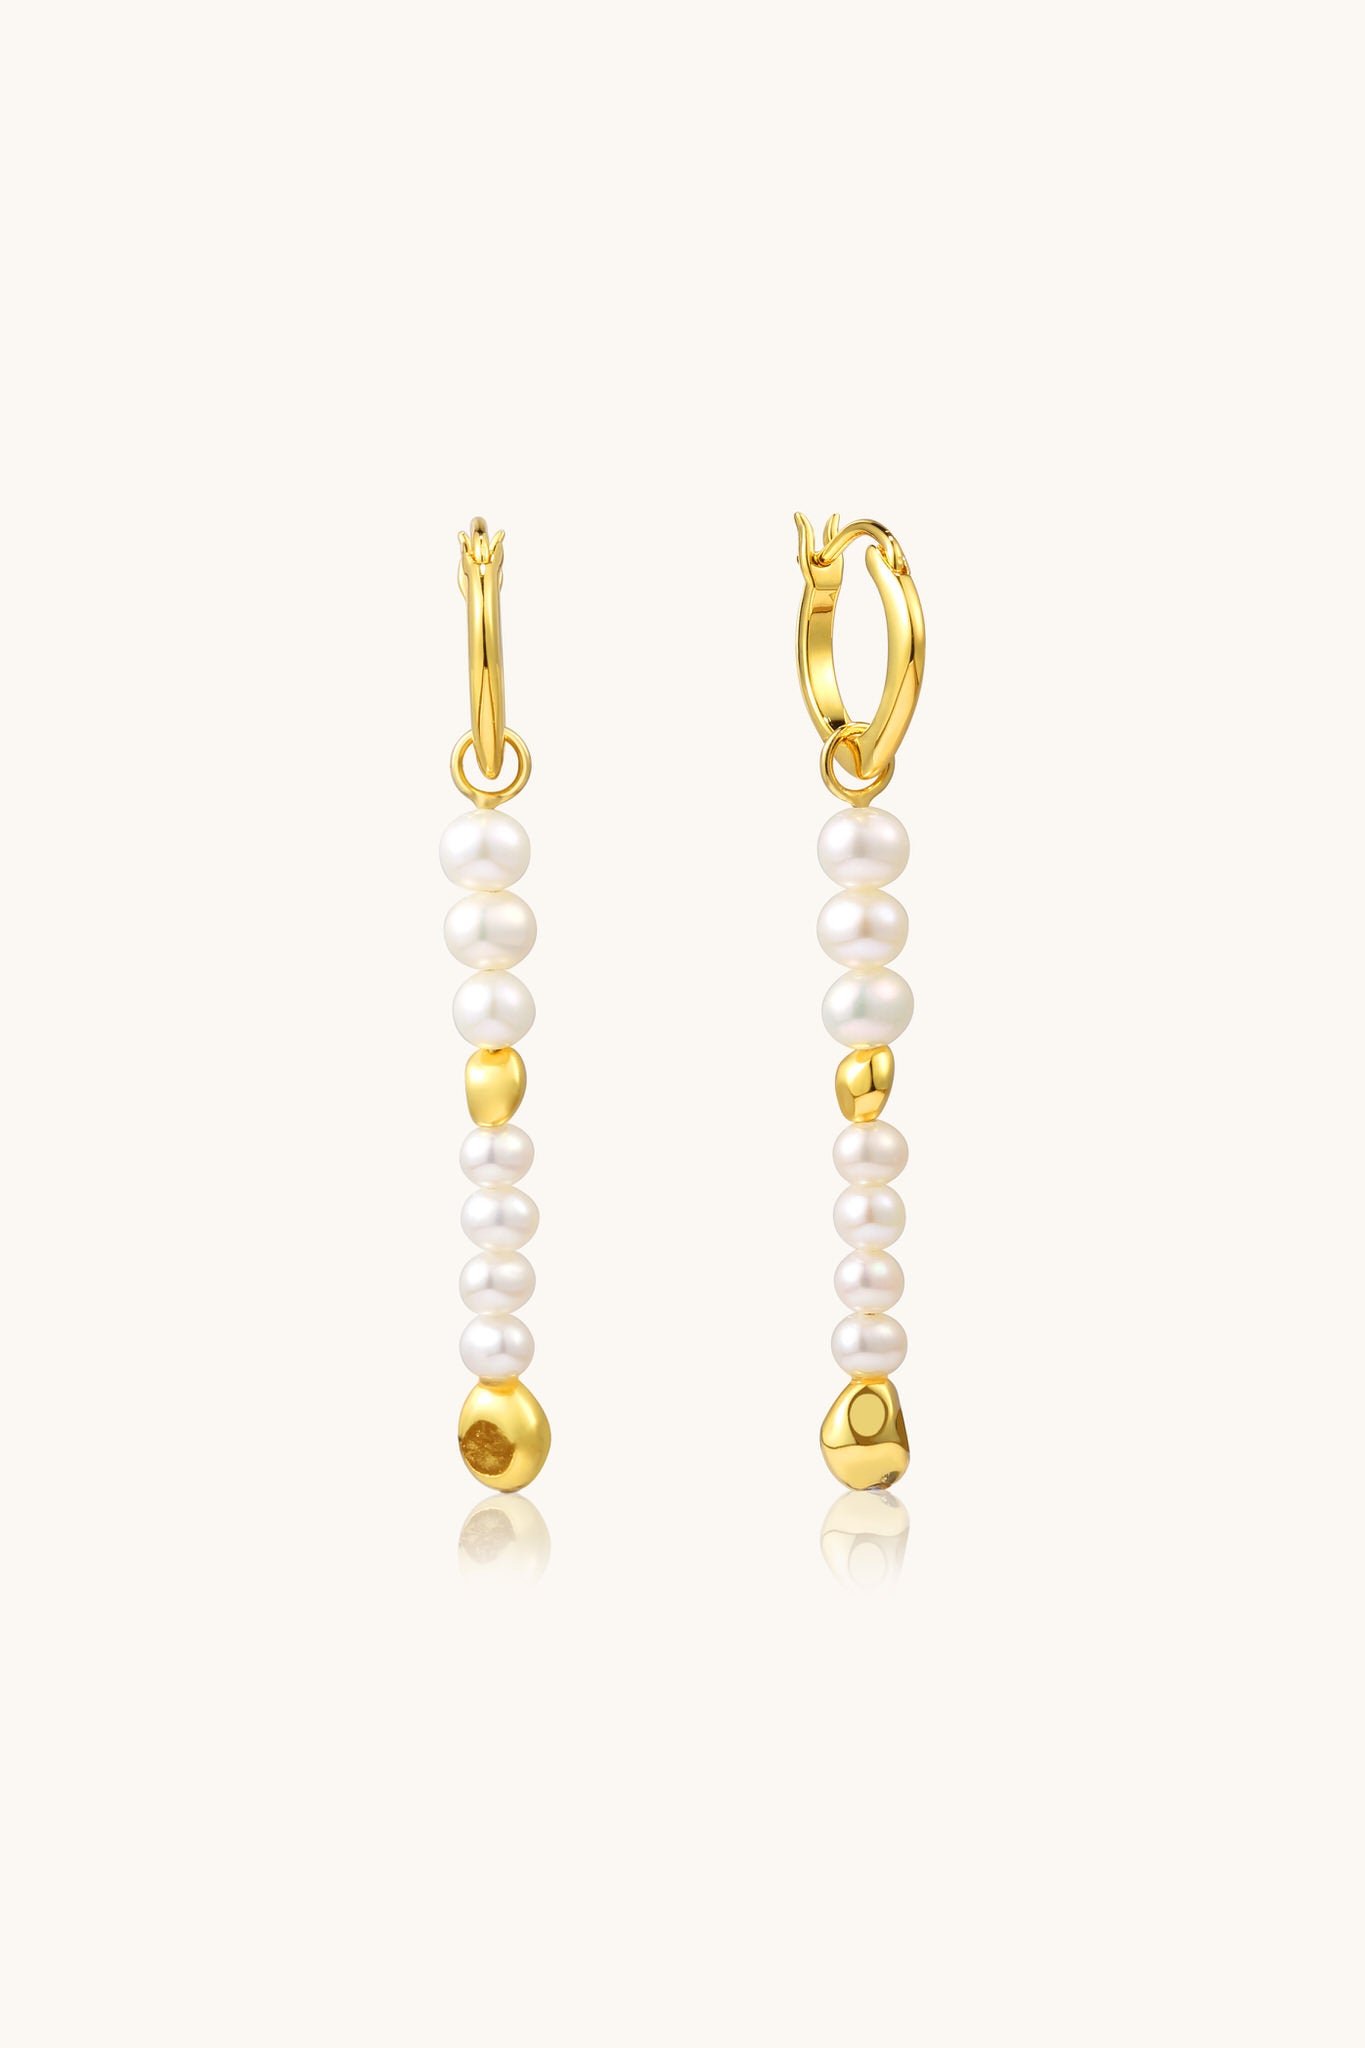 Round Freshwater Pearl with Gold Vermeil Beads Earrings